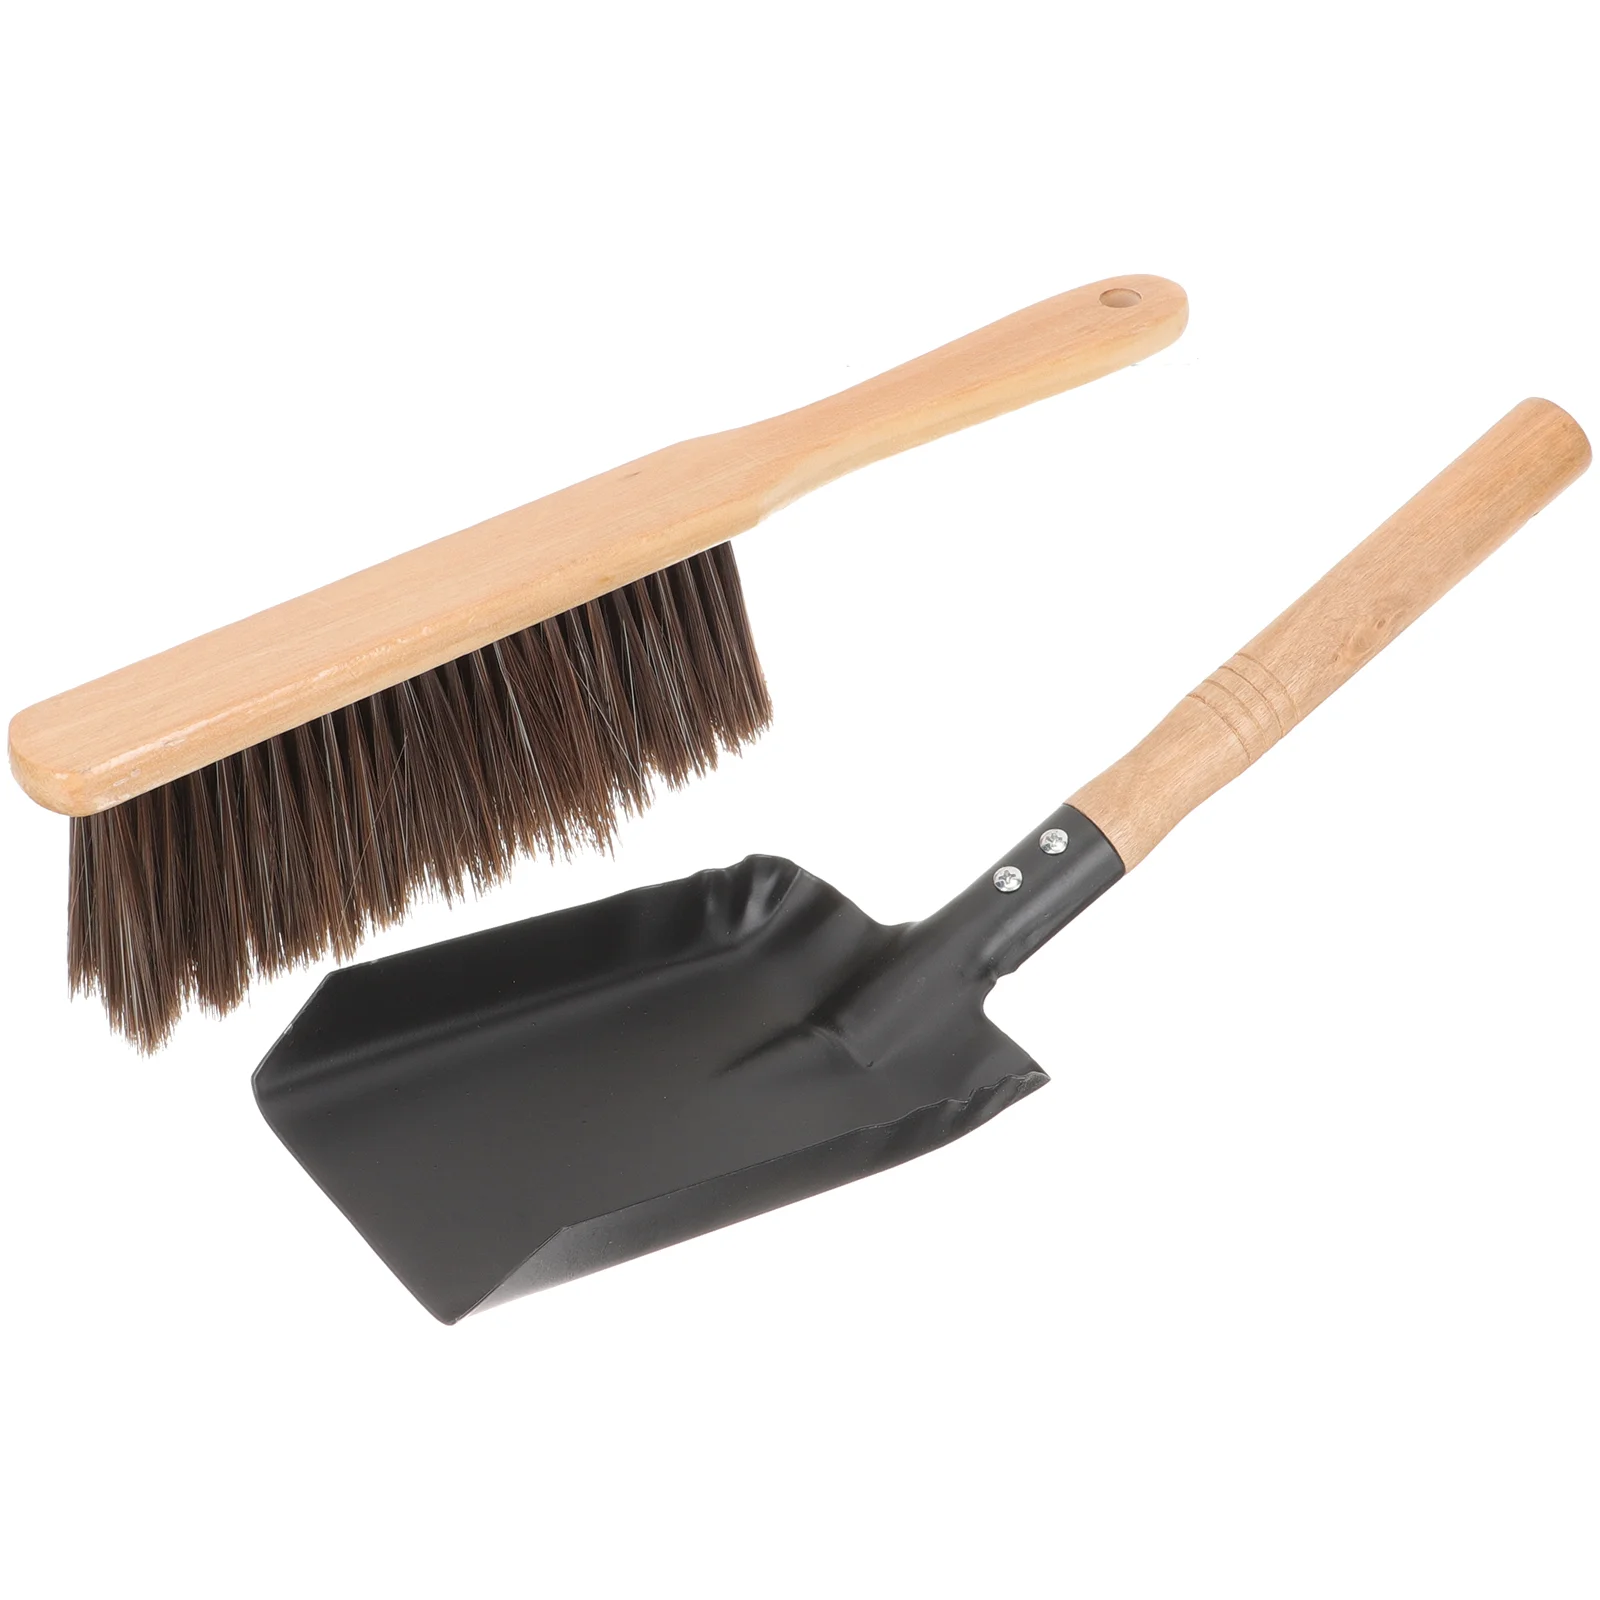 

Fireplace Cleaning Set Scoop Stove Duster and Brush Coals Home Wooden Coal-ash